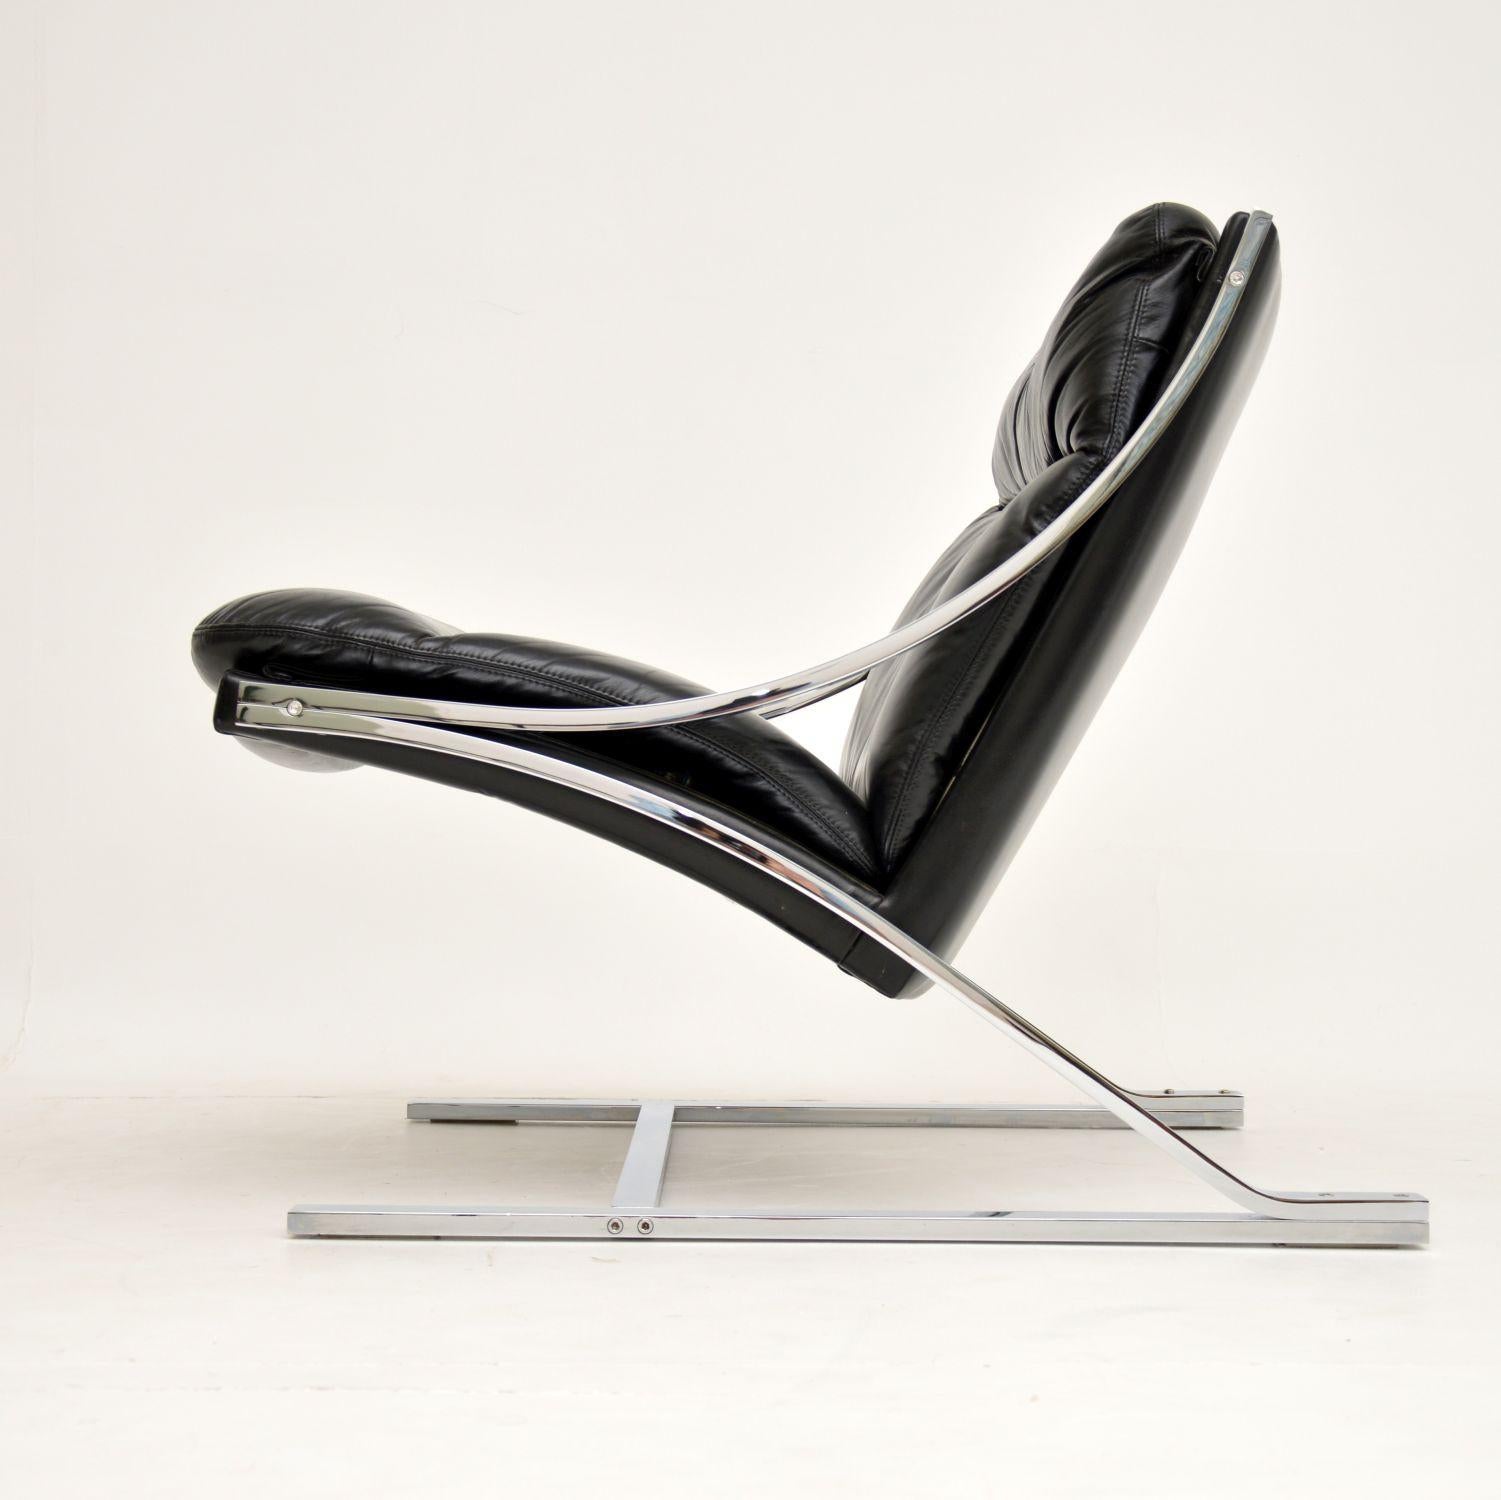 A beautiful and rare vintage lounge chair from the 1960’s. This was designed by Paul Tuttle, it’s called the Zeta chair, and was made by Strassle in Switzerland. The quality is amazing, the thick chrome frame is beautifully made and is very heavy.